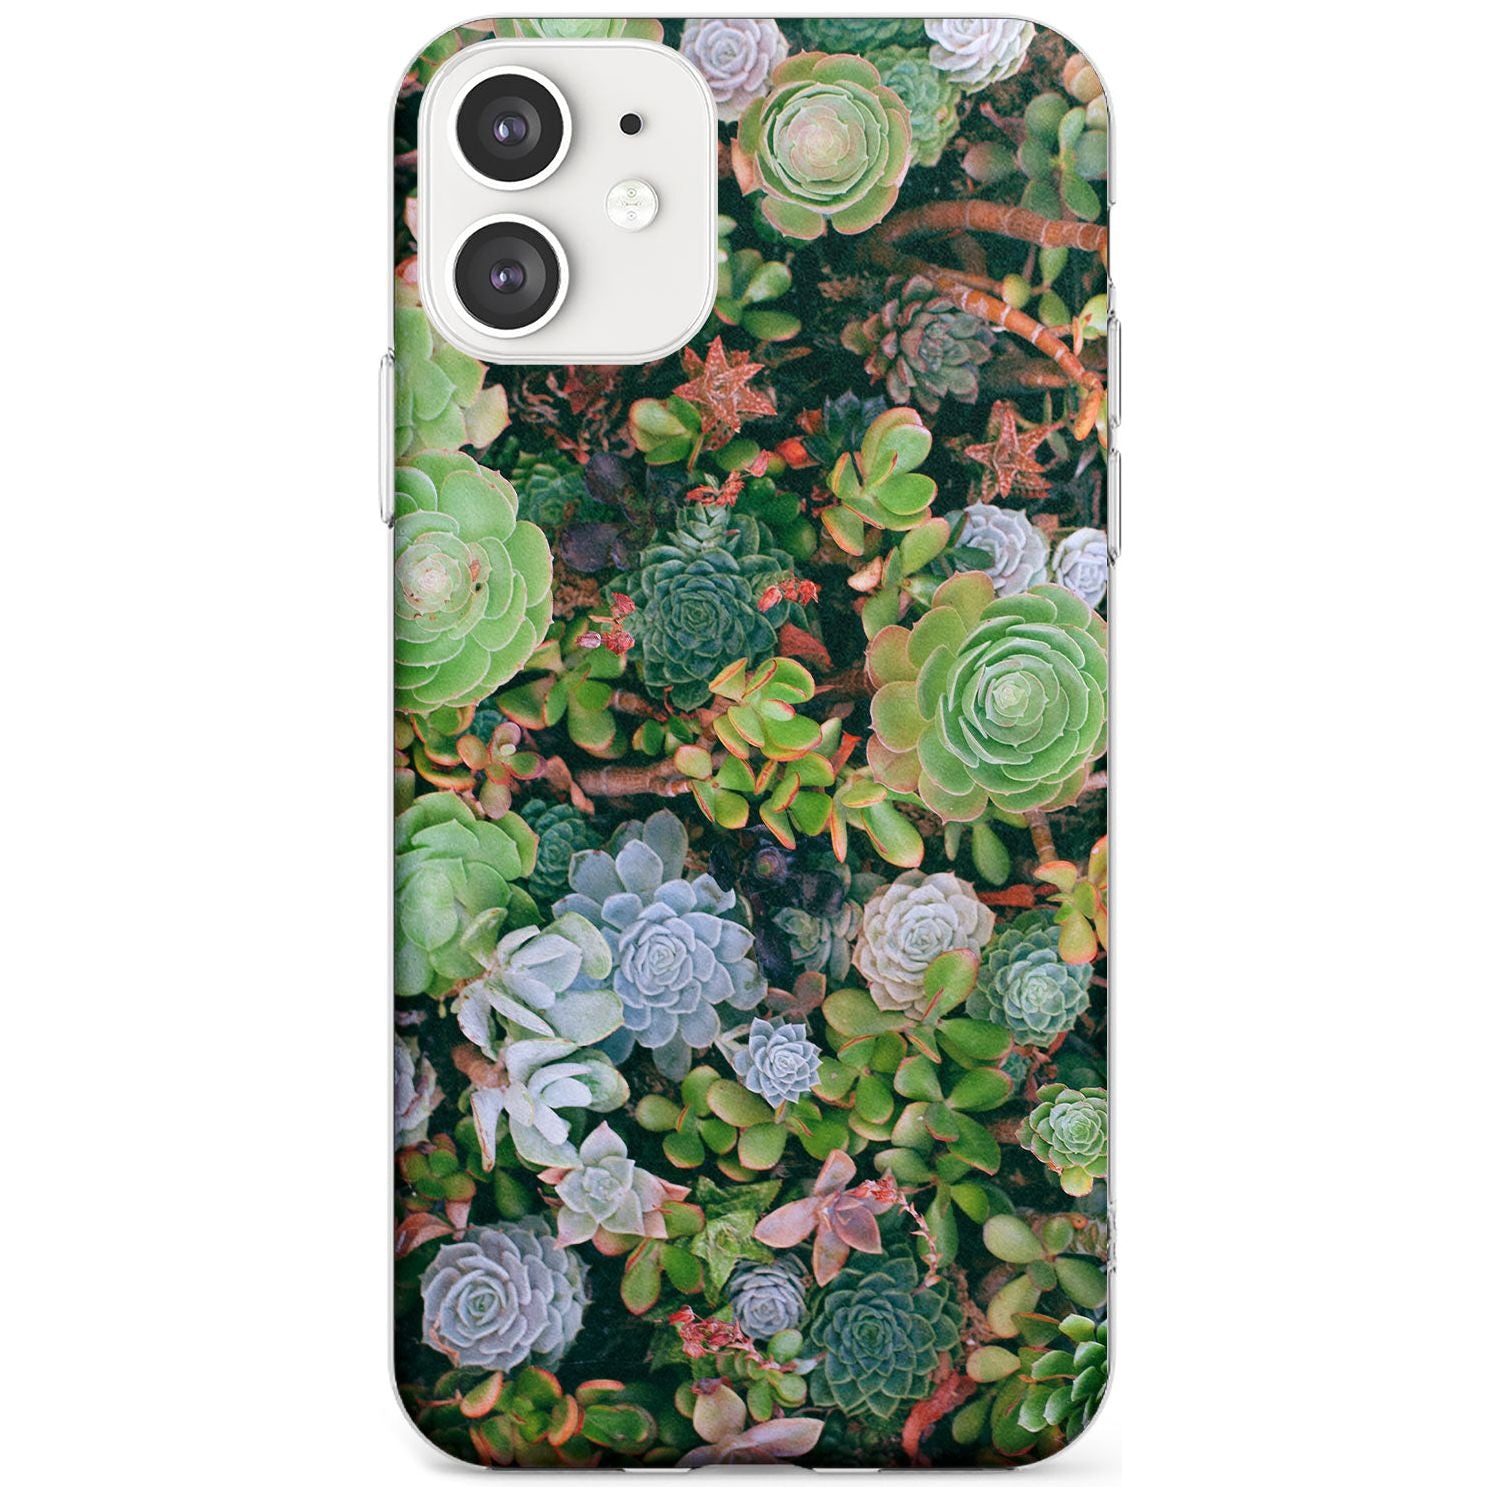 Colourful Succulents Photograph Slim TPU Phone Case for iPhone 11